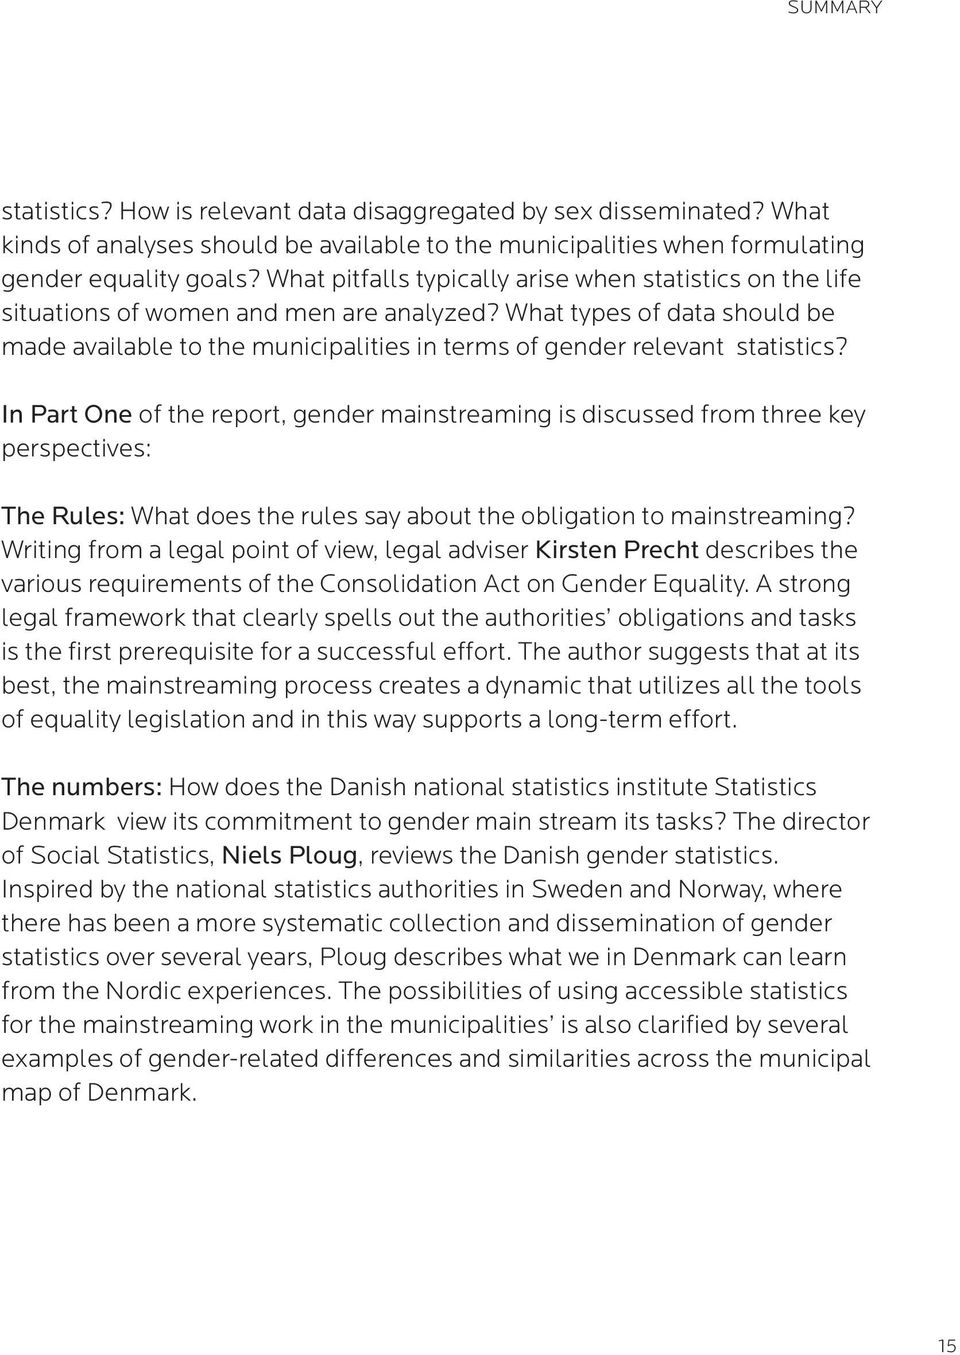 What types of data should be made available to the municipalities in terms of gender relevant statistics?